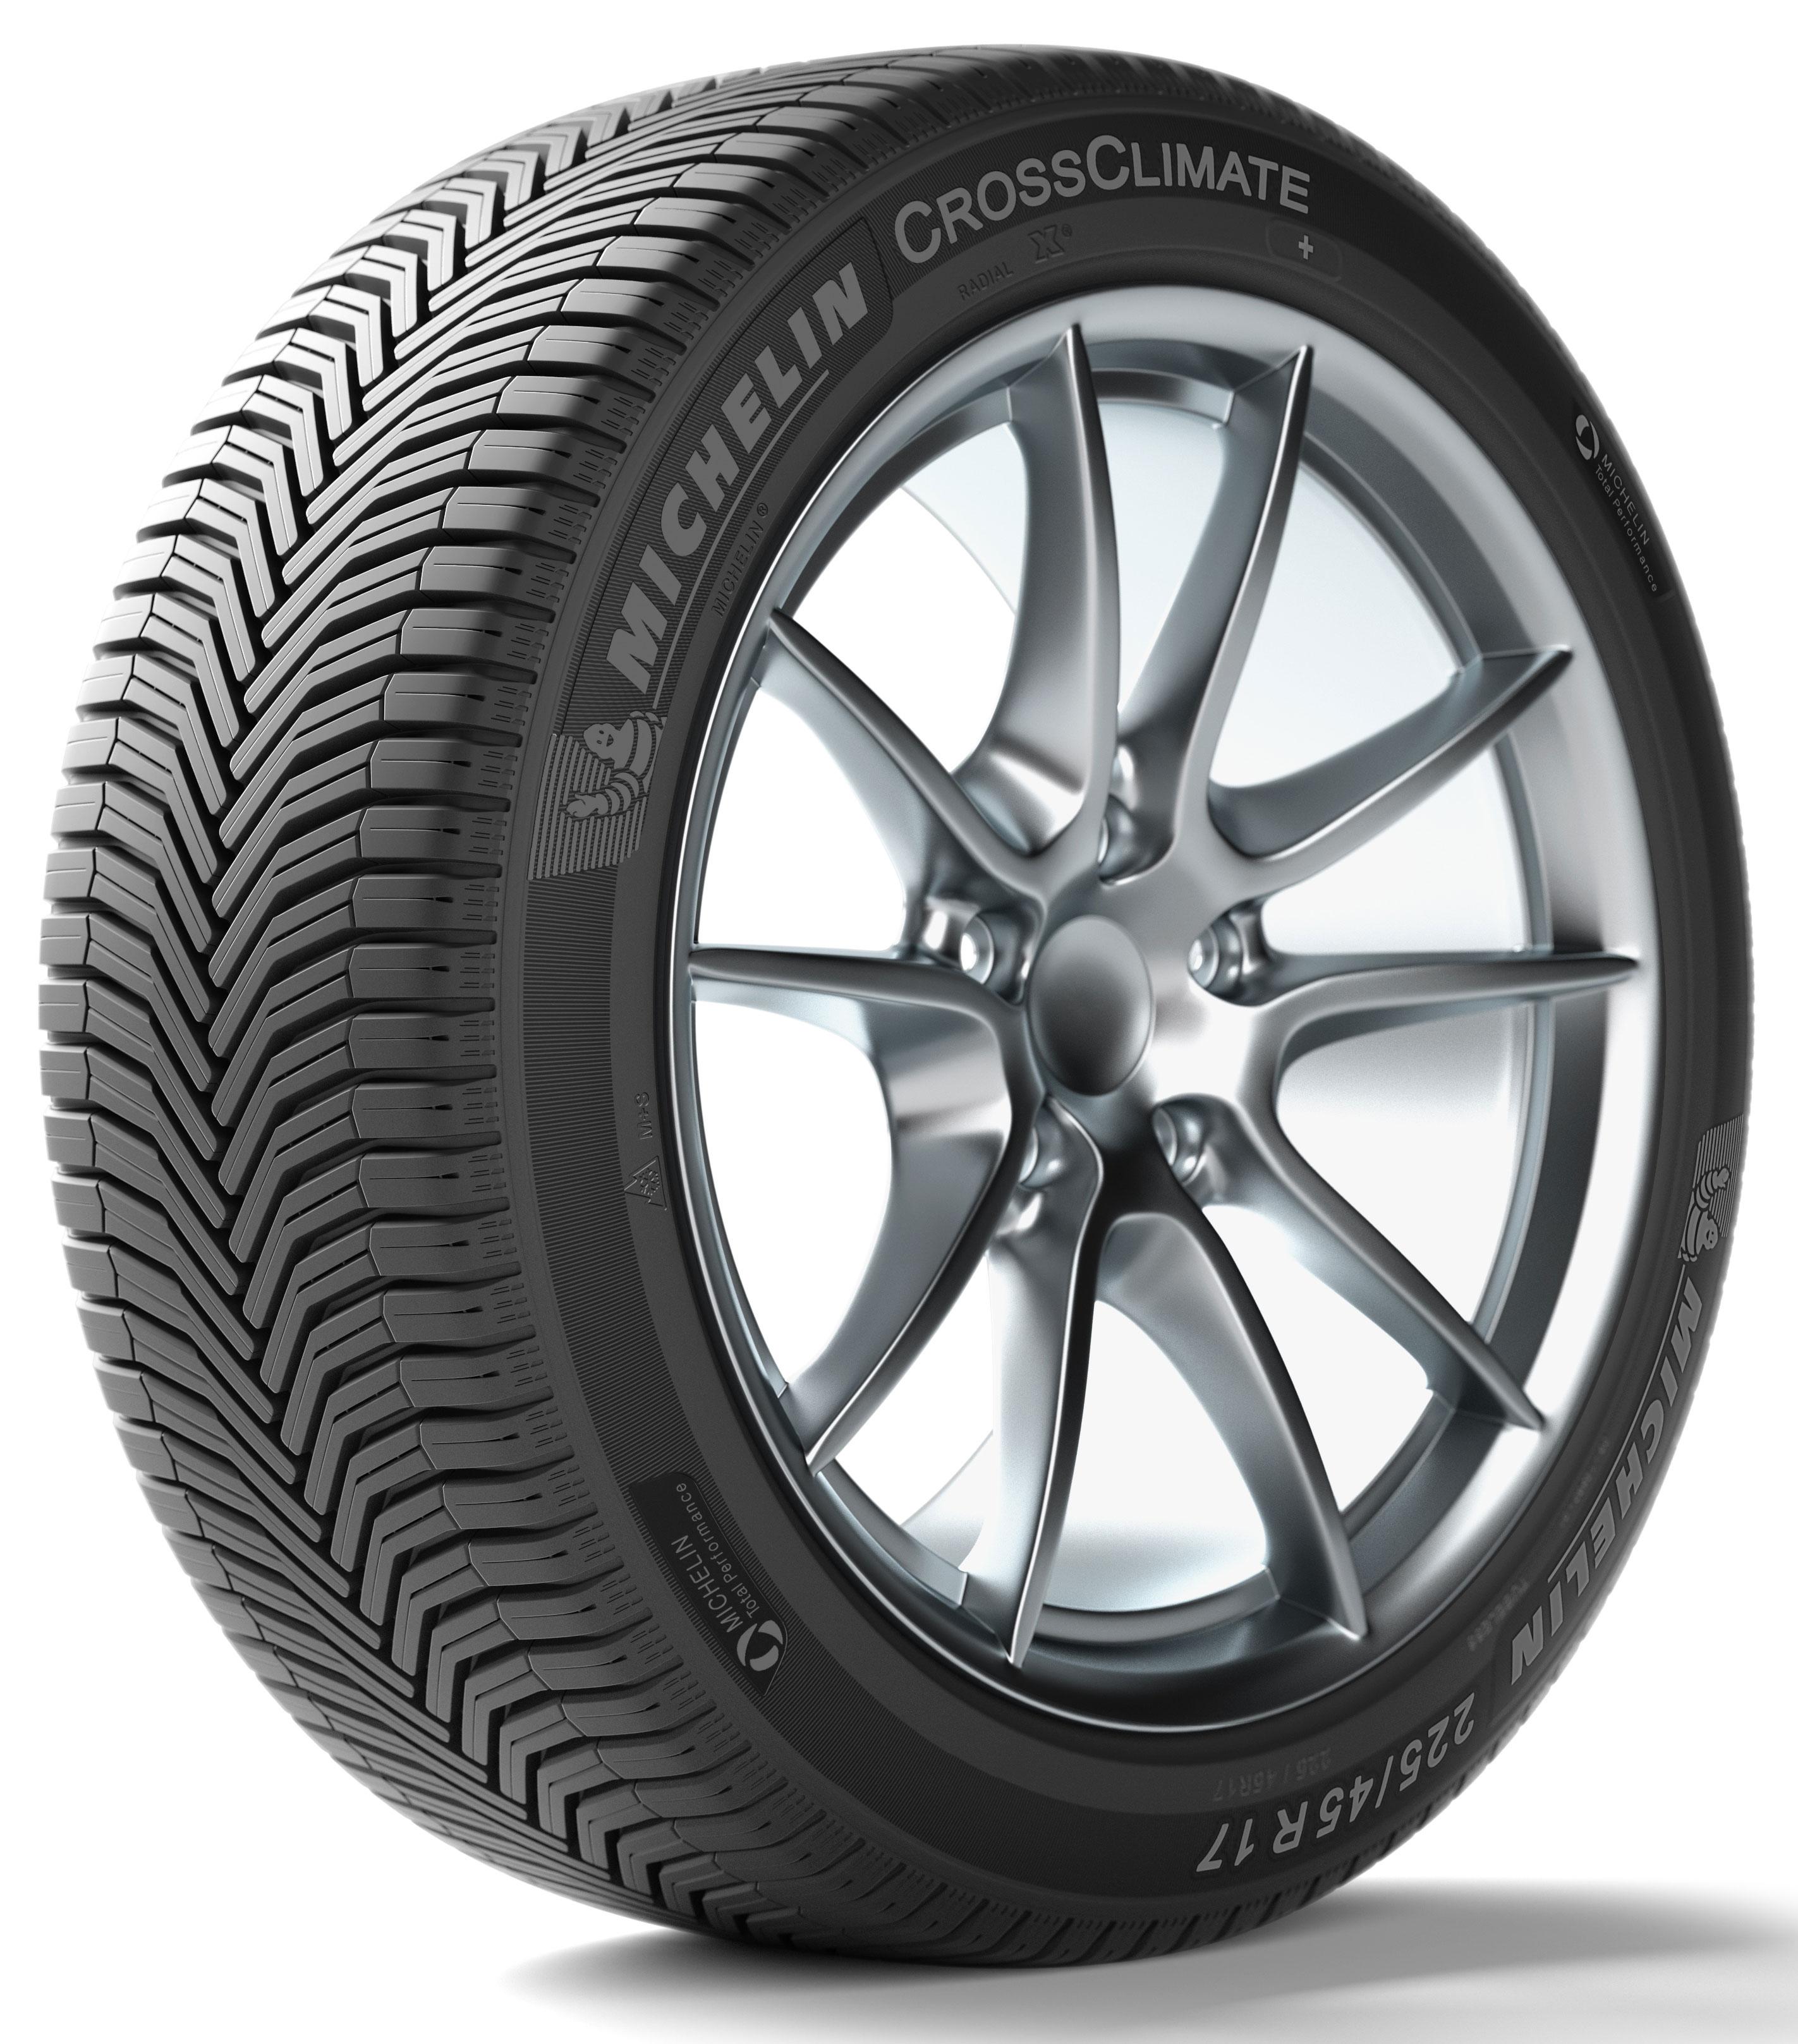 Anvelope all seasons MICHELIN CrossClimate+ M+S XL 165/70 R14 85T